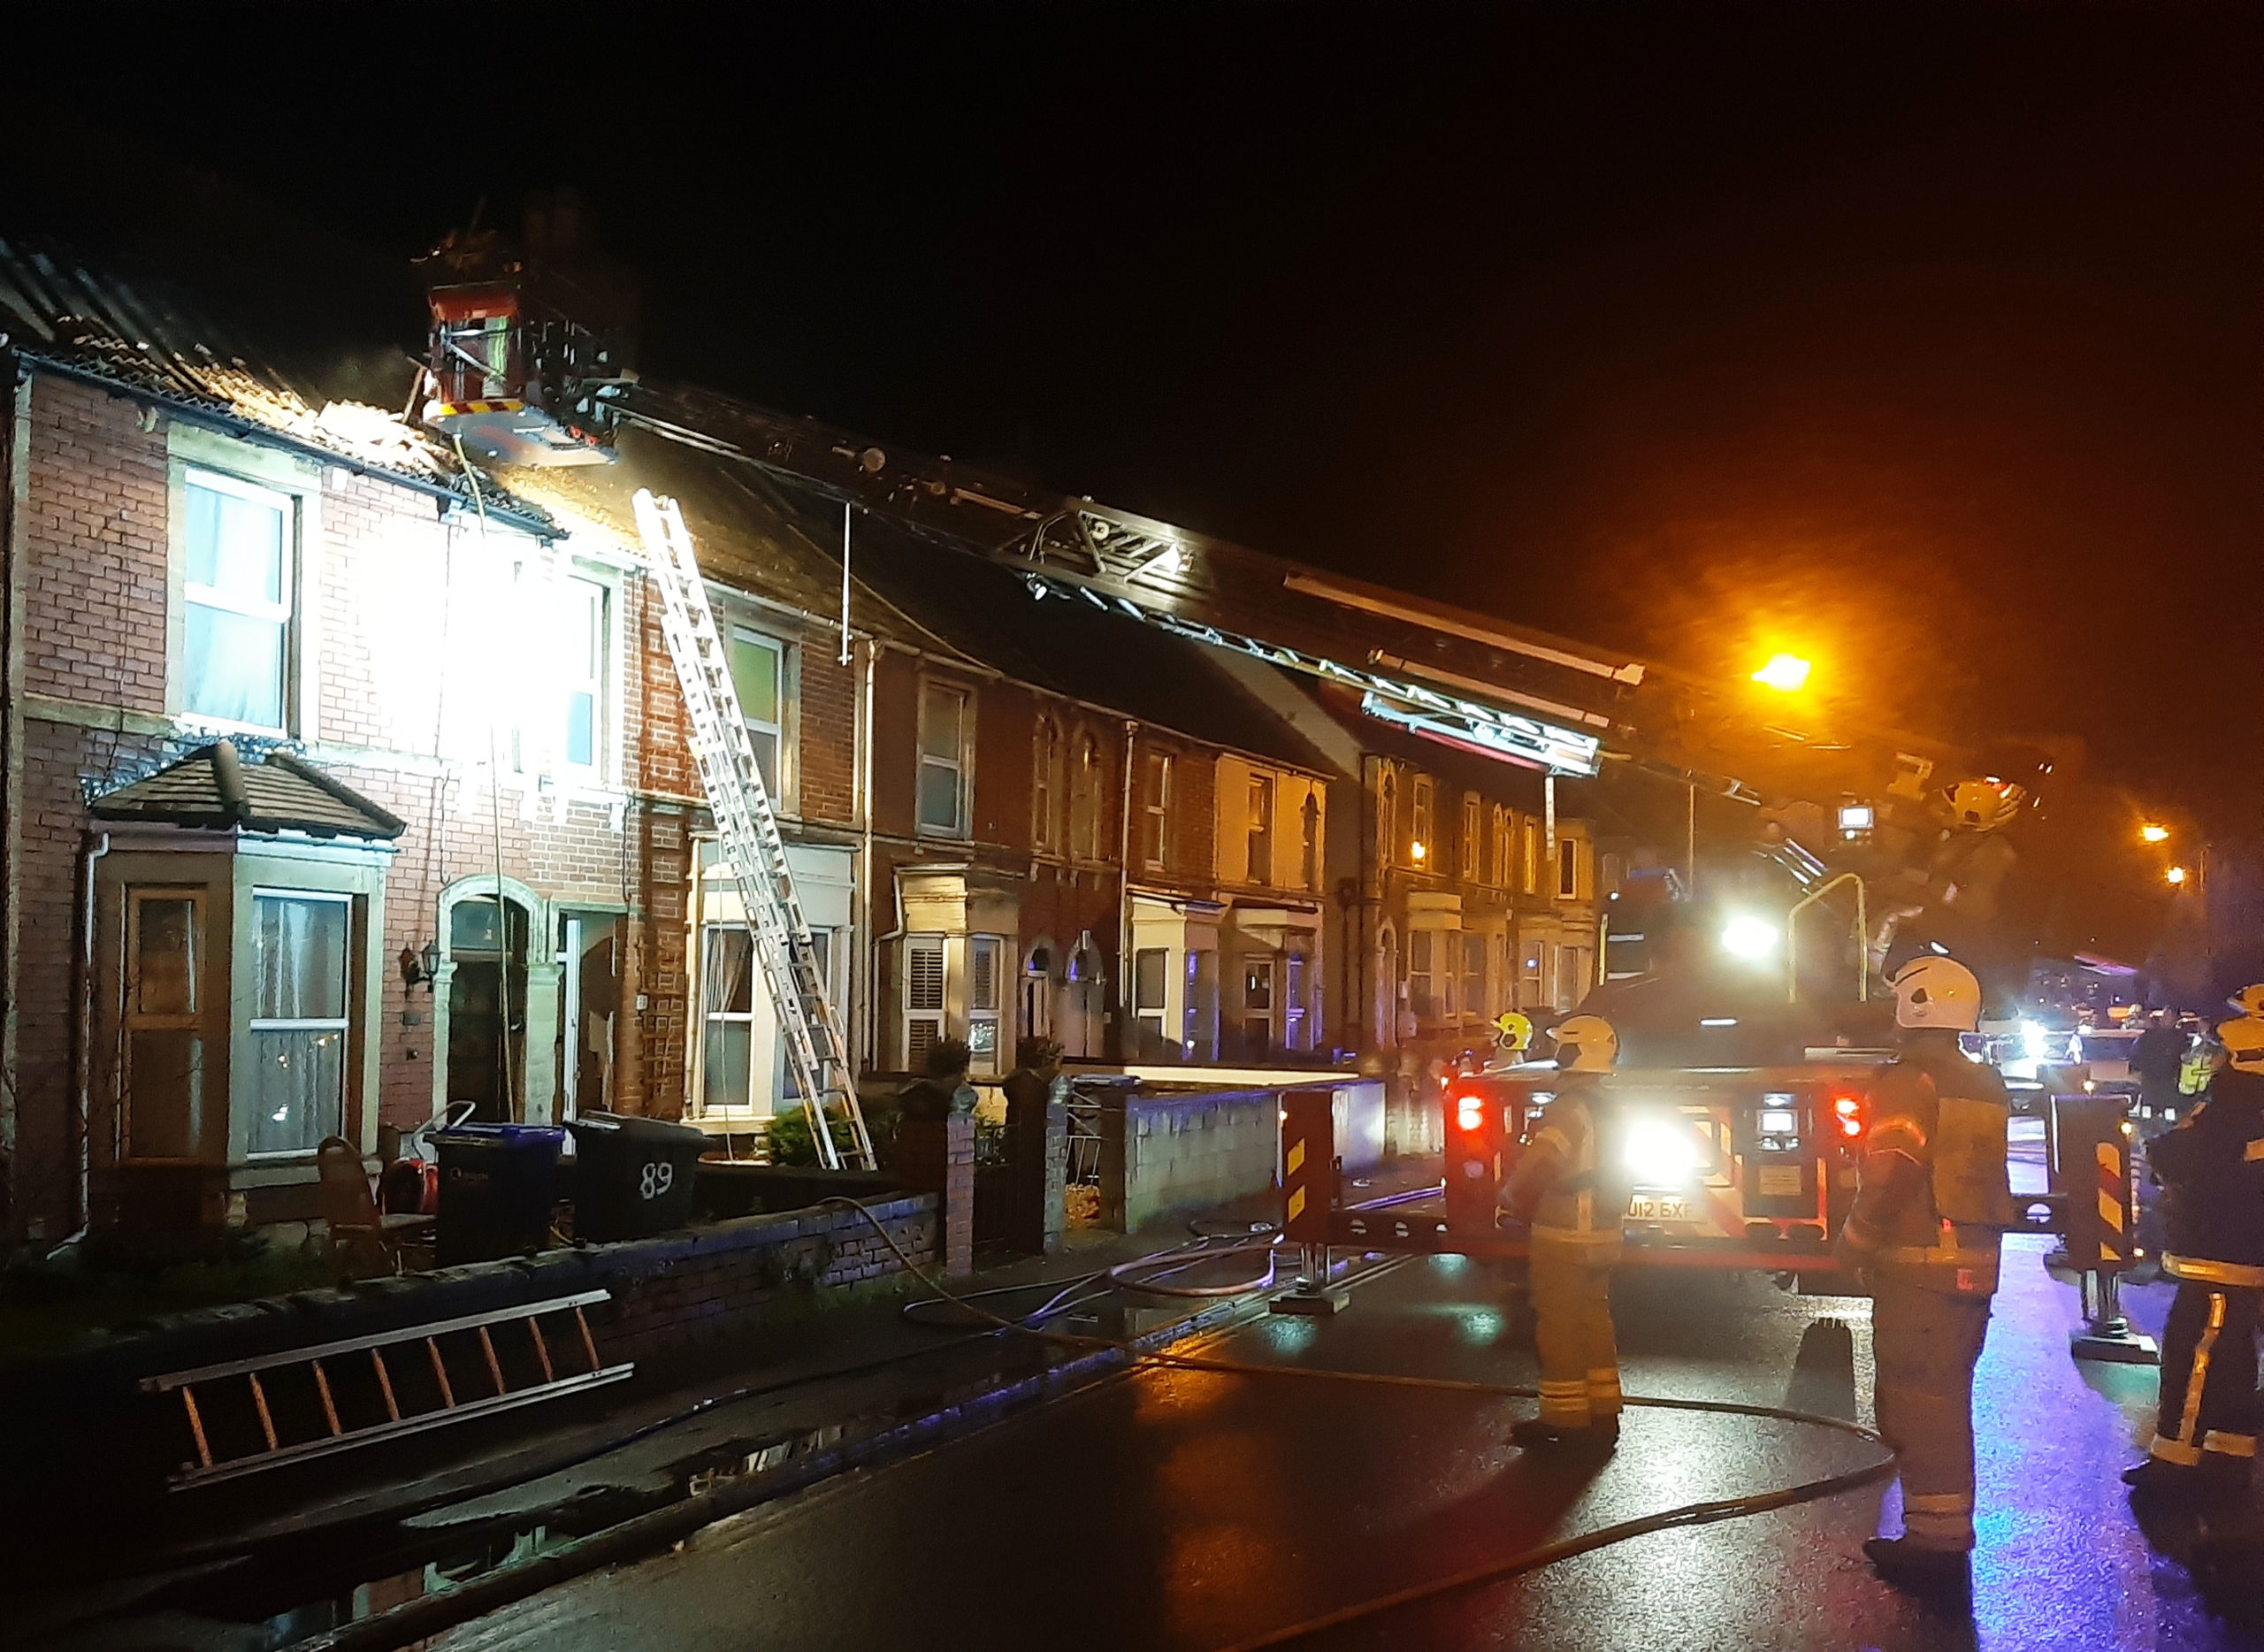 The aerial ladder platform is used to access the roof of the property on fire